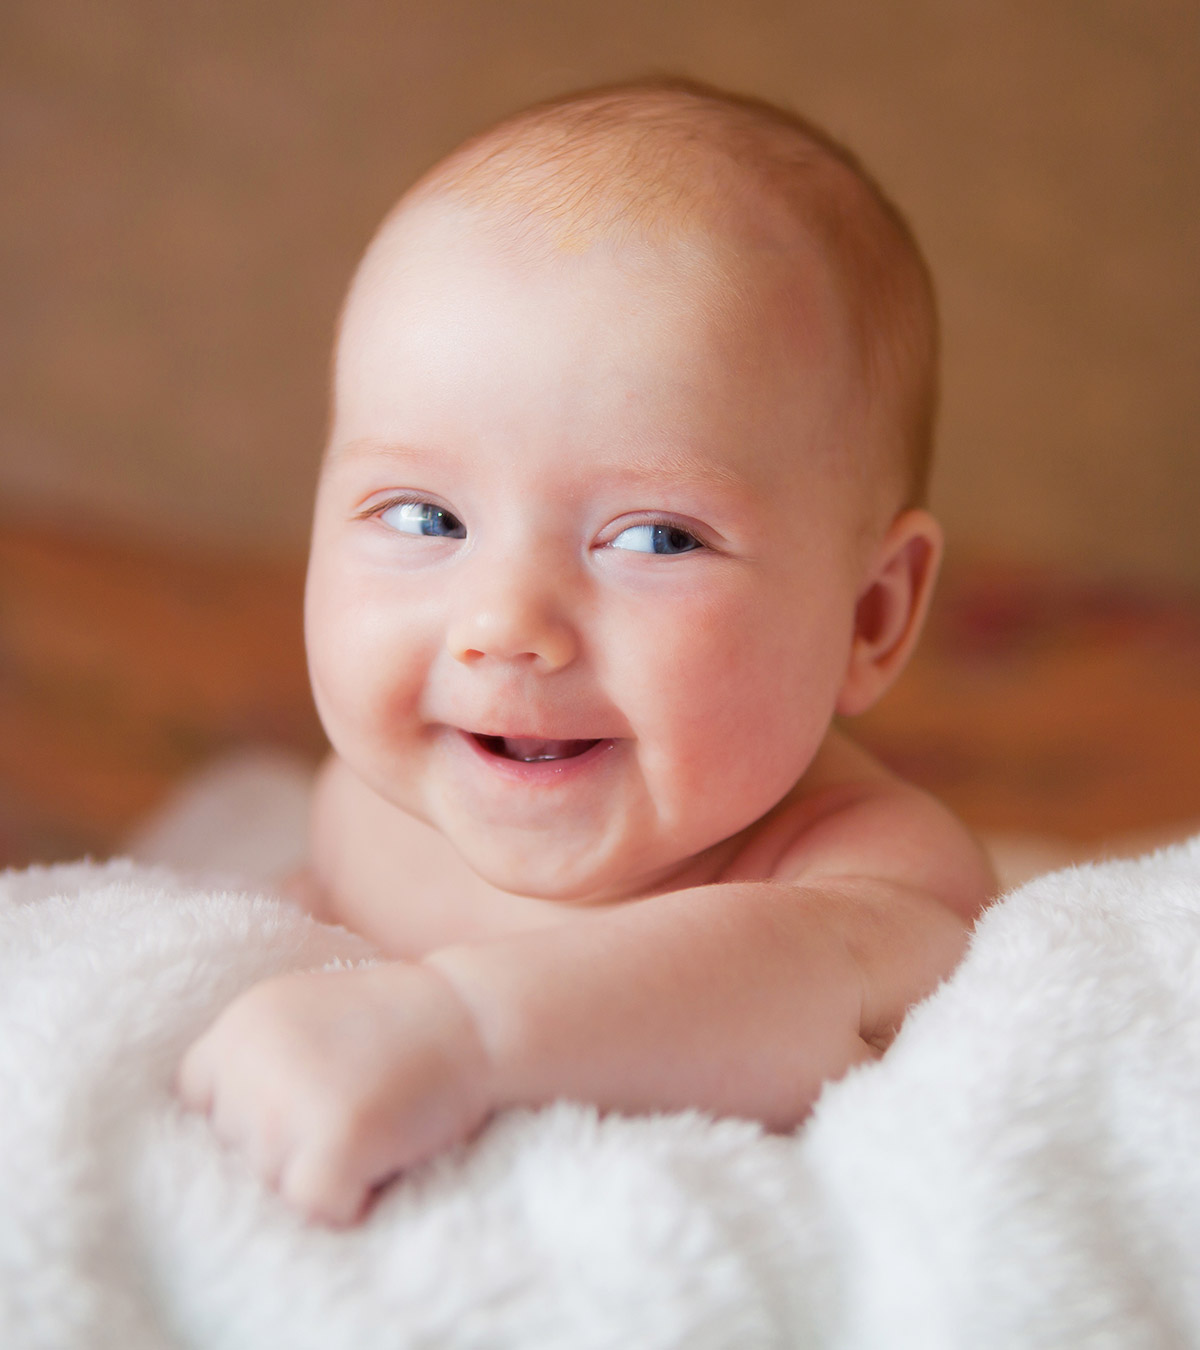 25 Interesting Facts About Babies That Will Surprise You